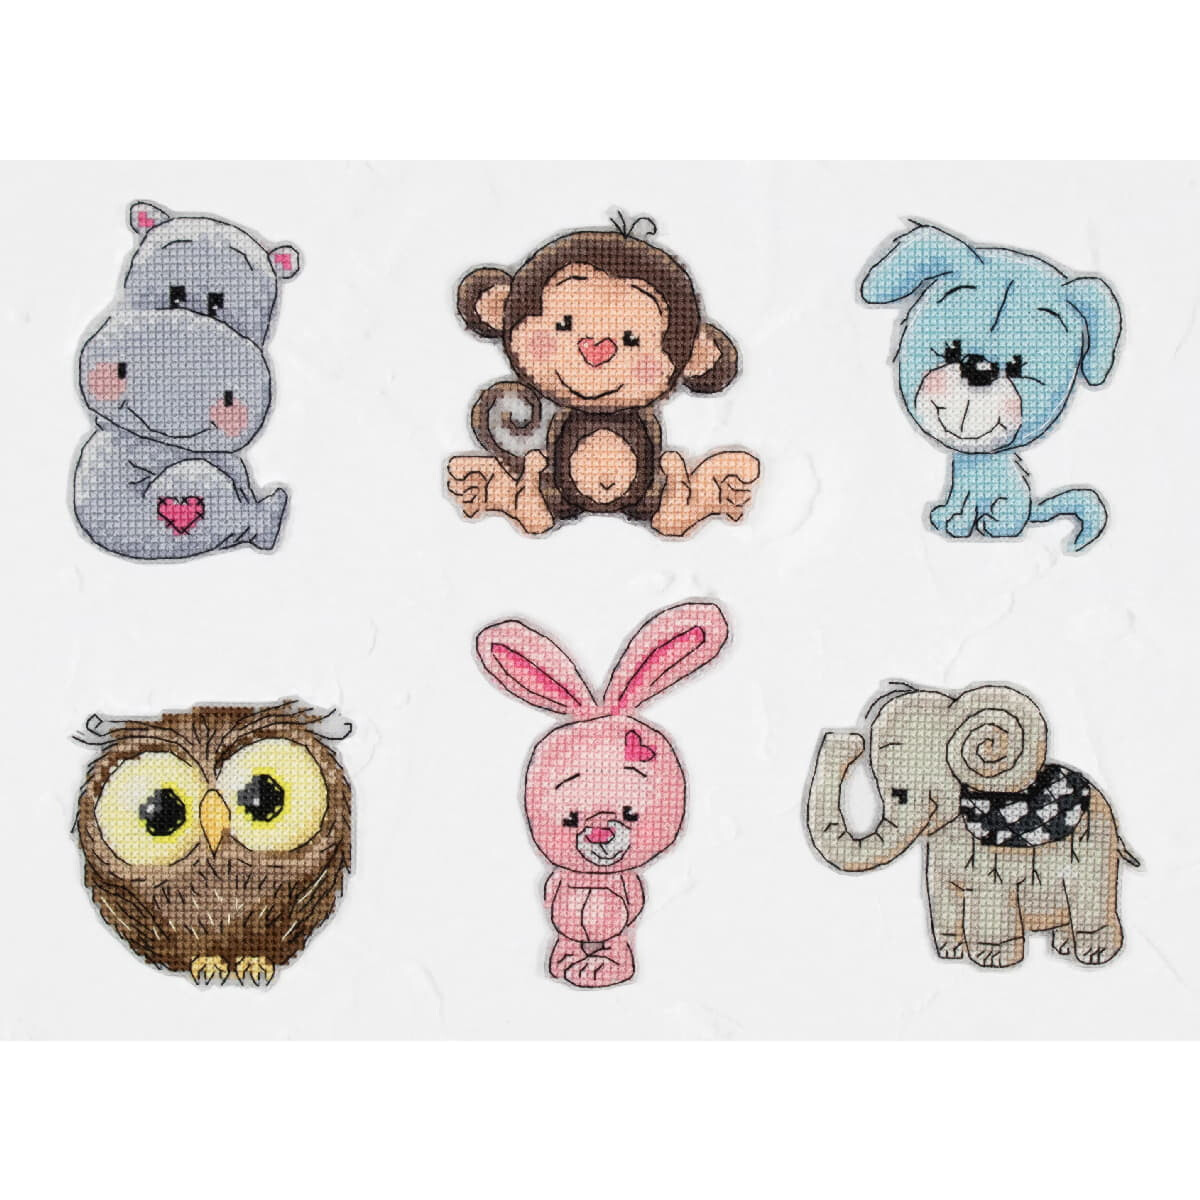 An adorable embroidery pack with six cute cartoon-style...